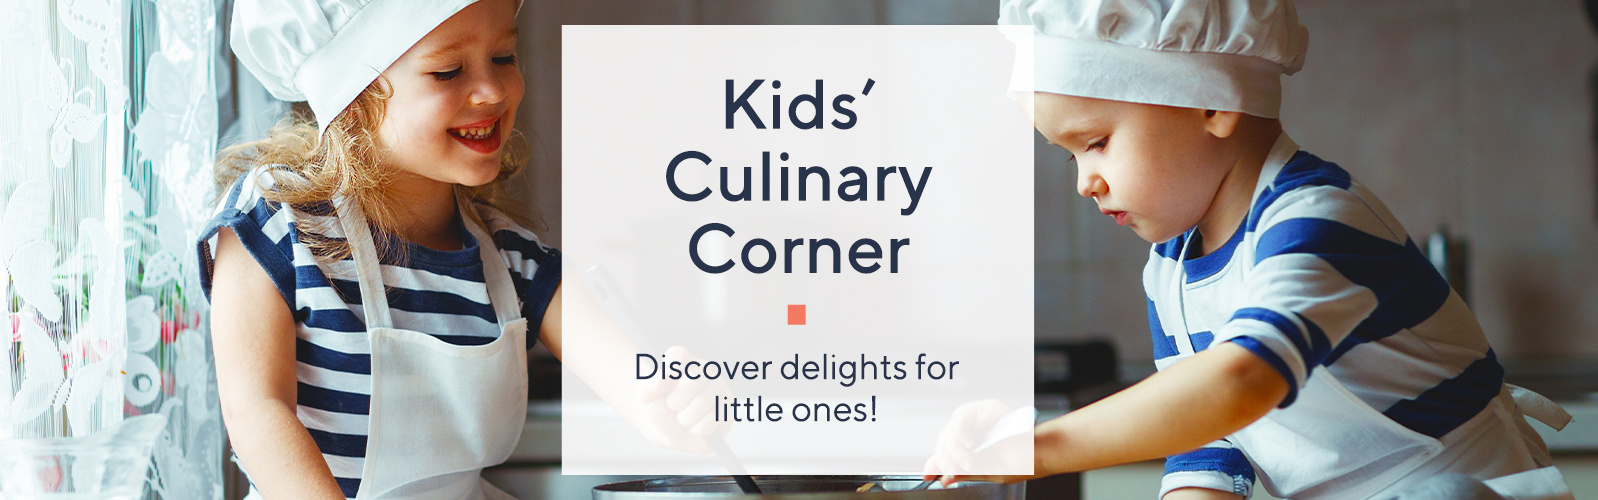 Kids' Culinary Corner.  Discover delights for little ones!